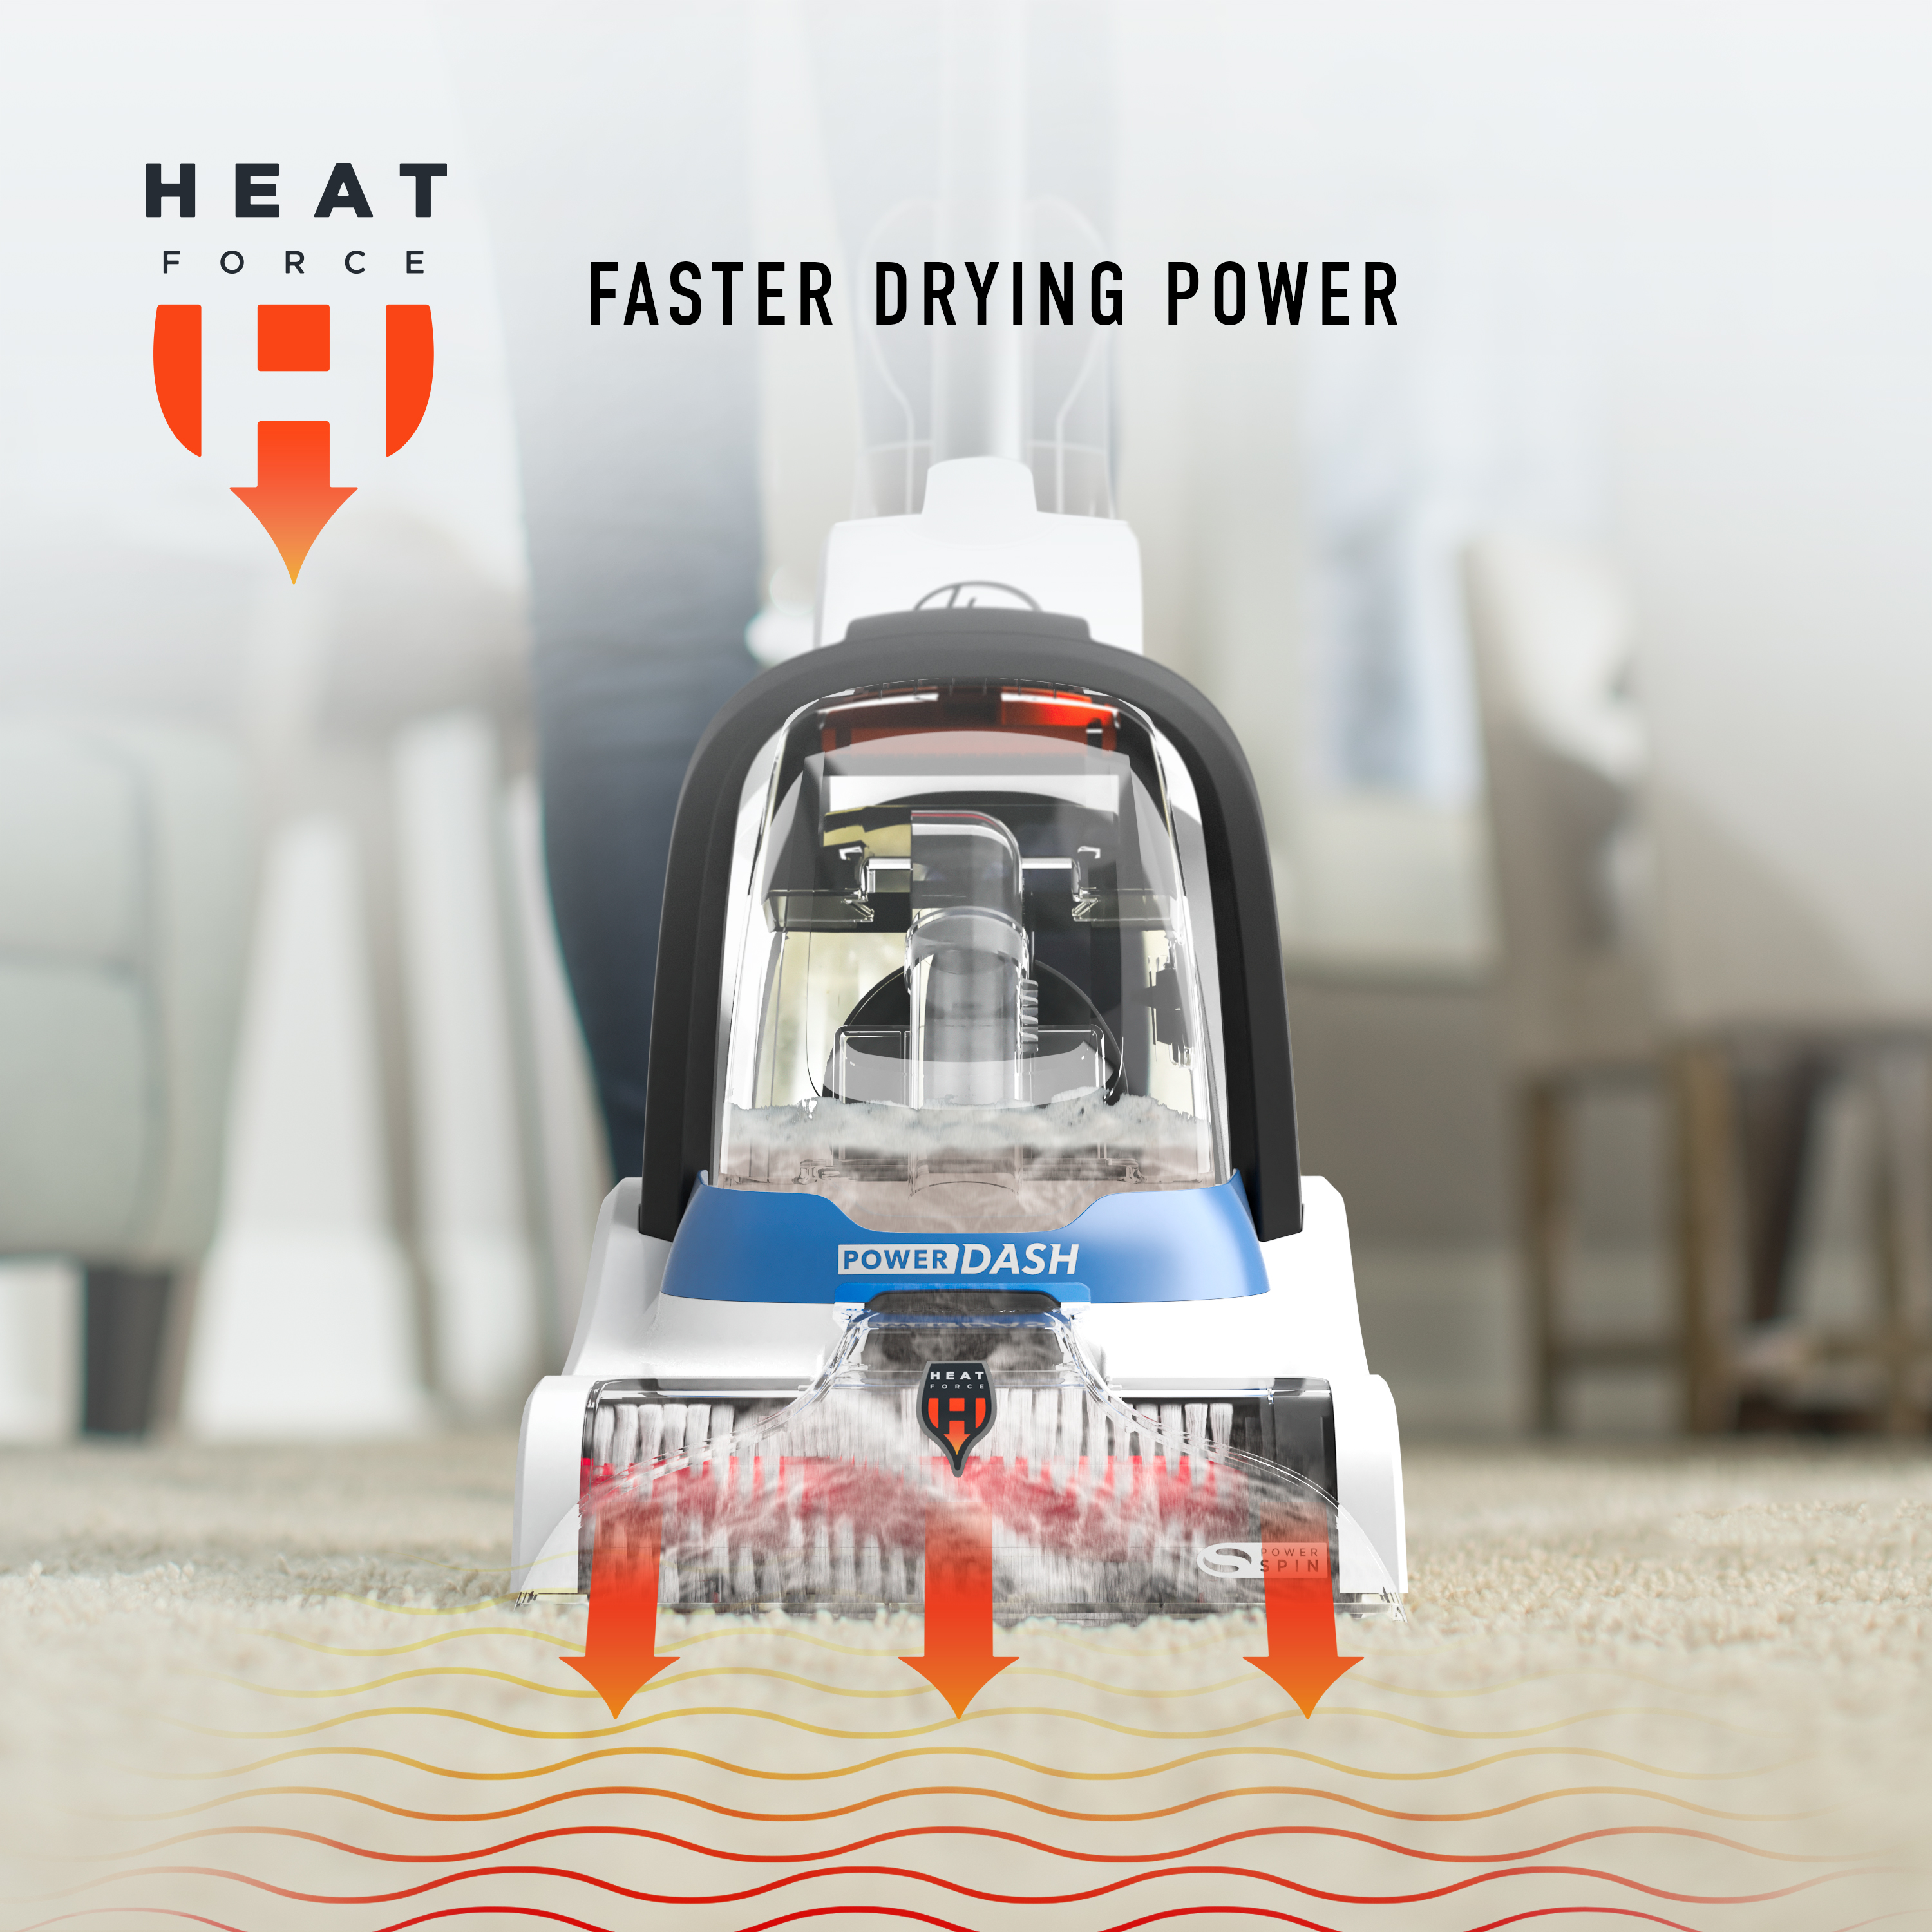 Hoover PowerDash Pet, Upright Carpet Cleaner Machine with Clean Pack Carpet Cleaner Solution Pod Samples, FH50712 - image 6 of 17